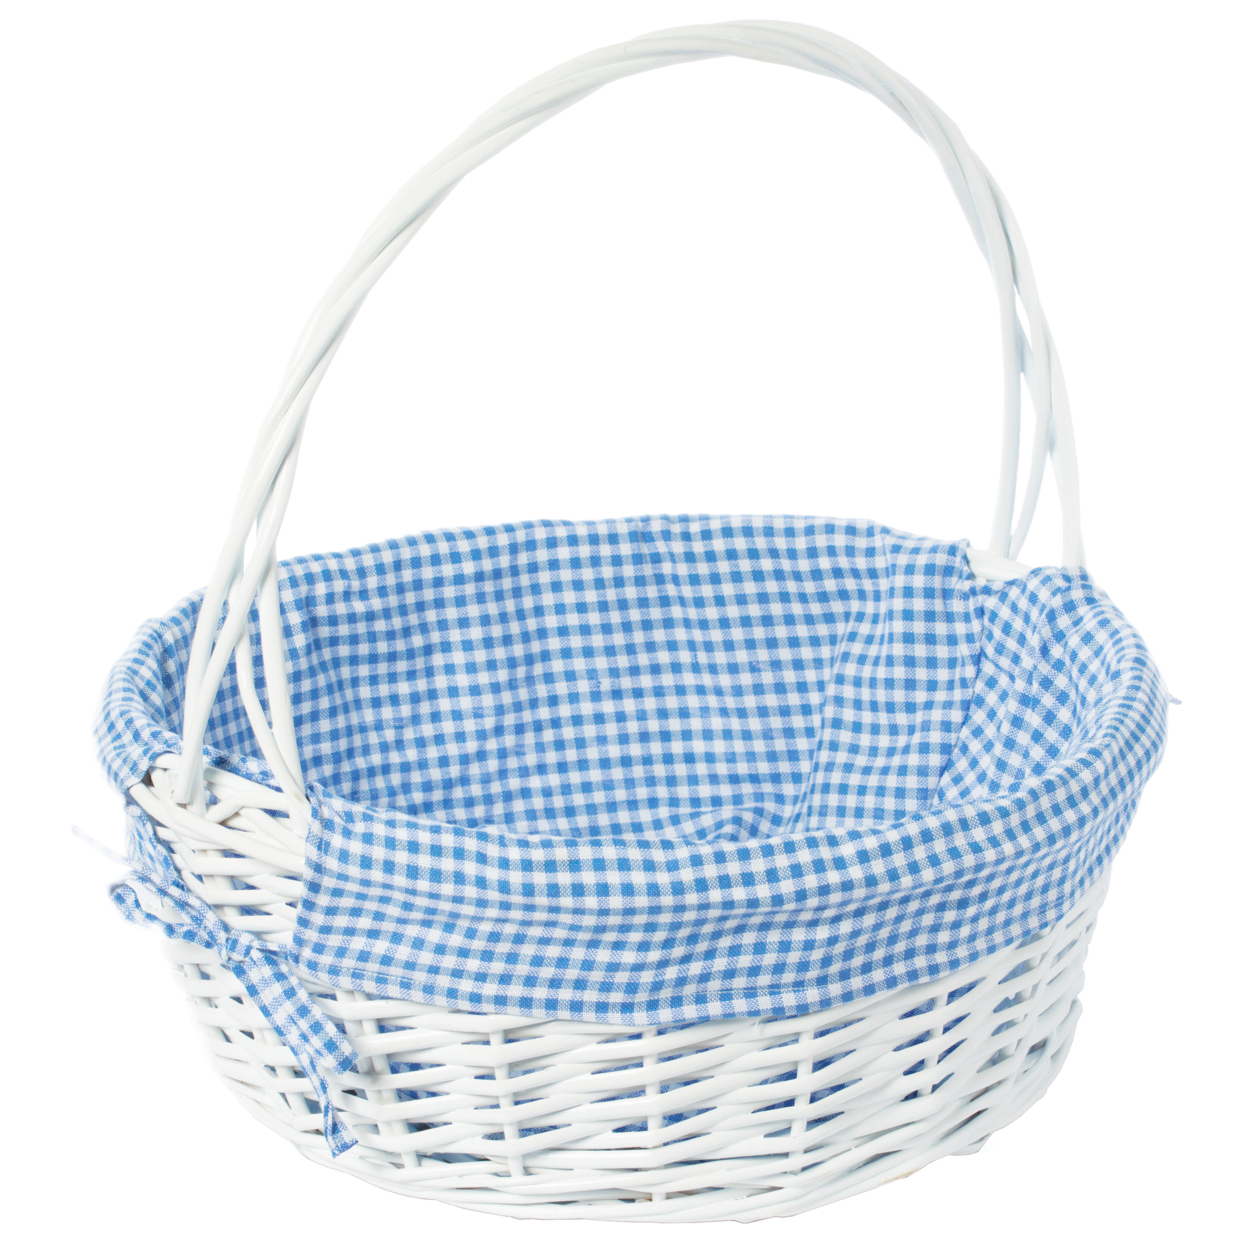 White Round Willow Gift Basket, With Blue And White Gingham Liner And Handles - Blue Set Of 3